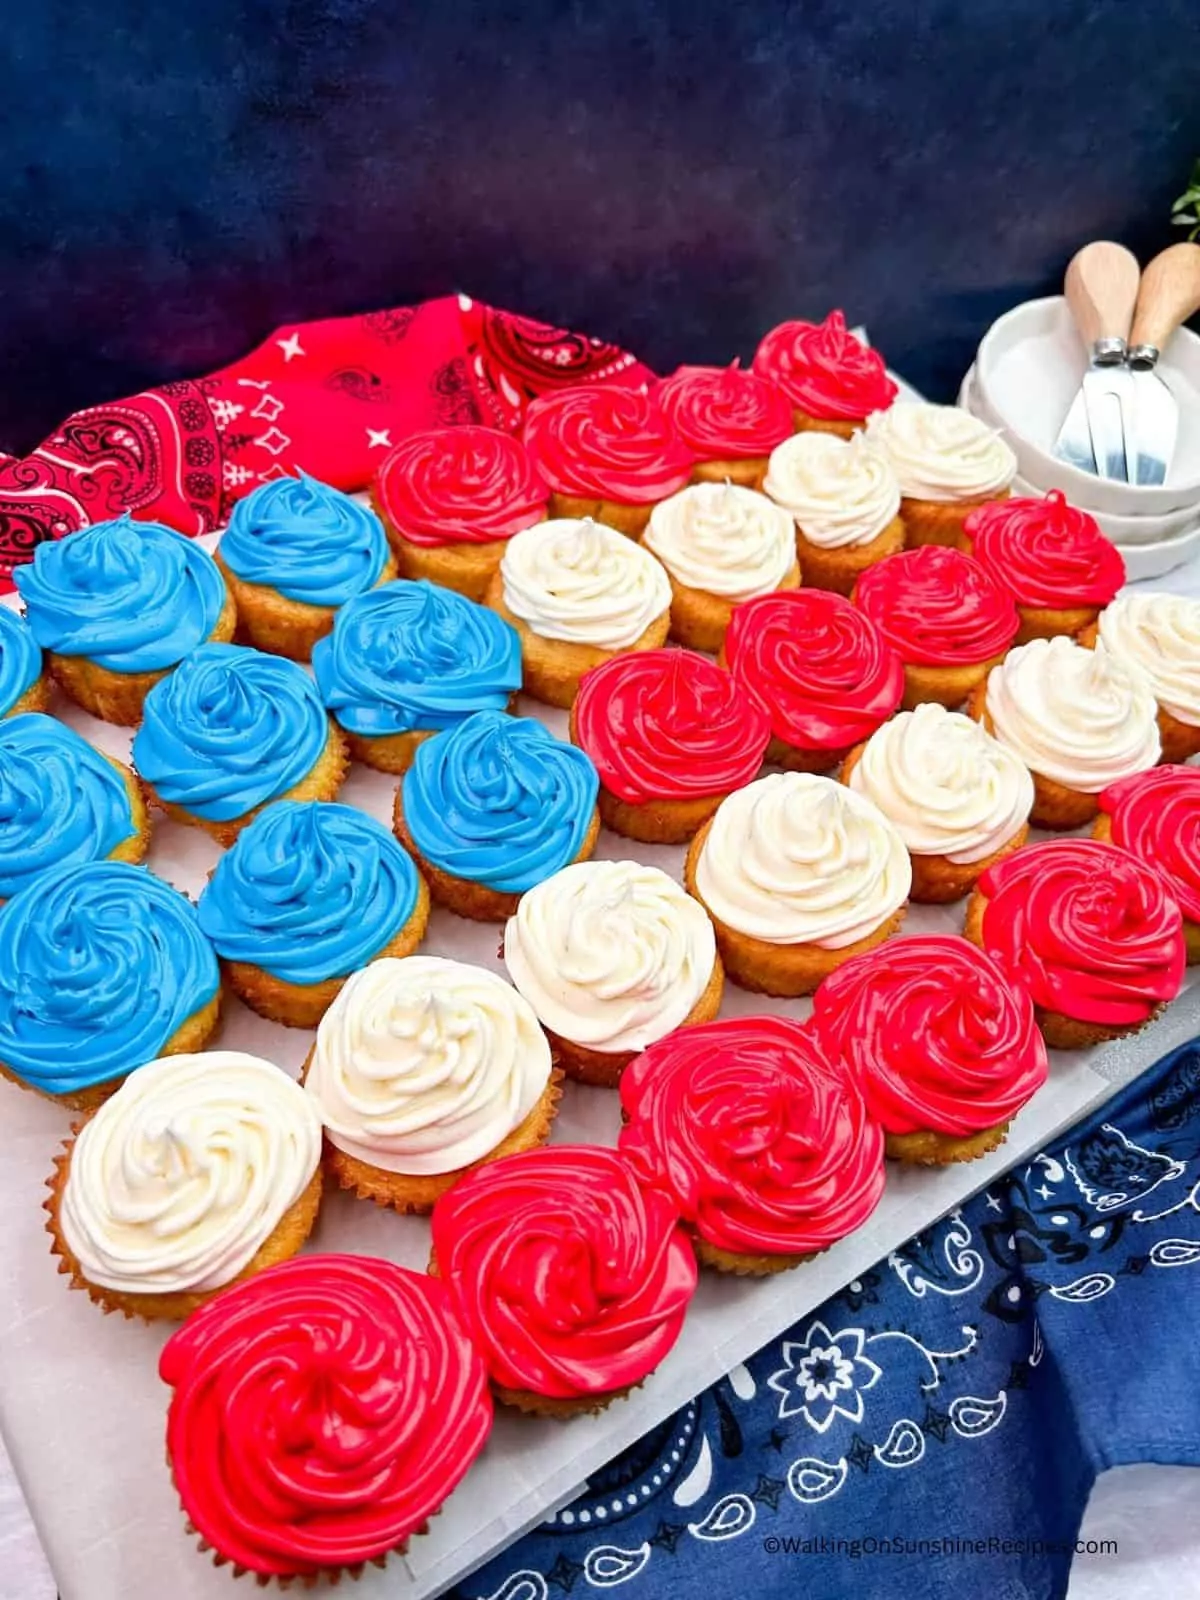 pull apart cupcake cake in the design of an American flag.